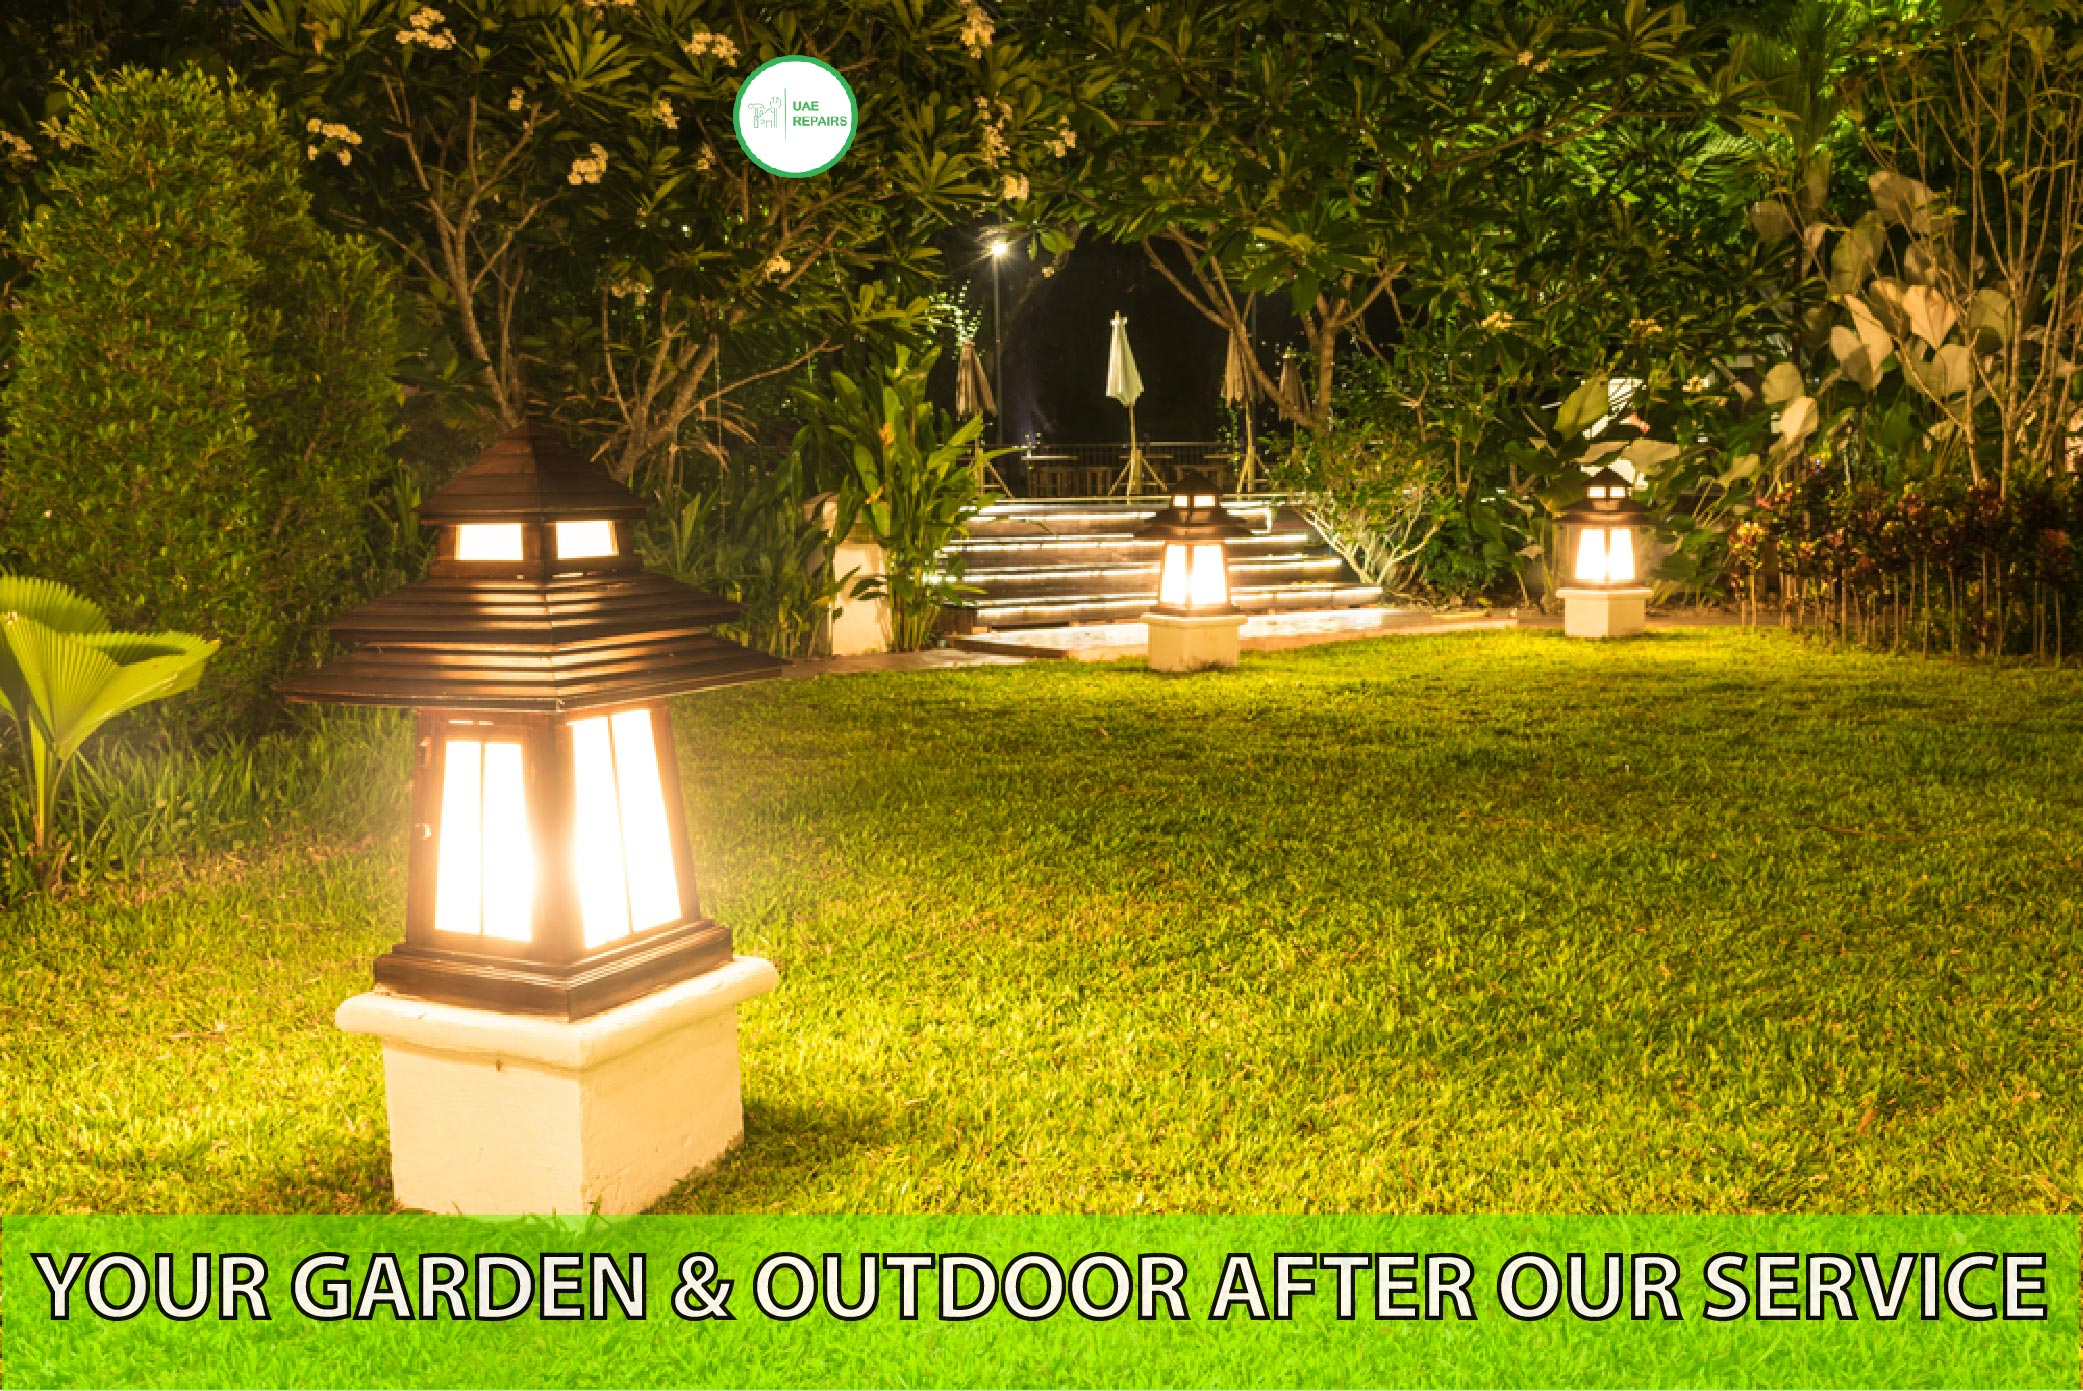 UAE REPAIRS Your Garden and Outdoor After Our Service .CONTACT US 0588997516